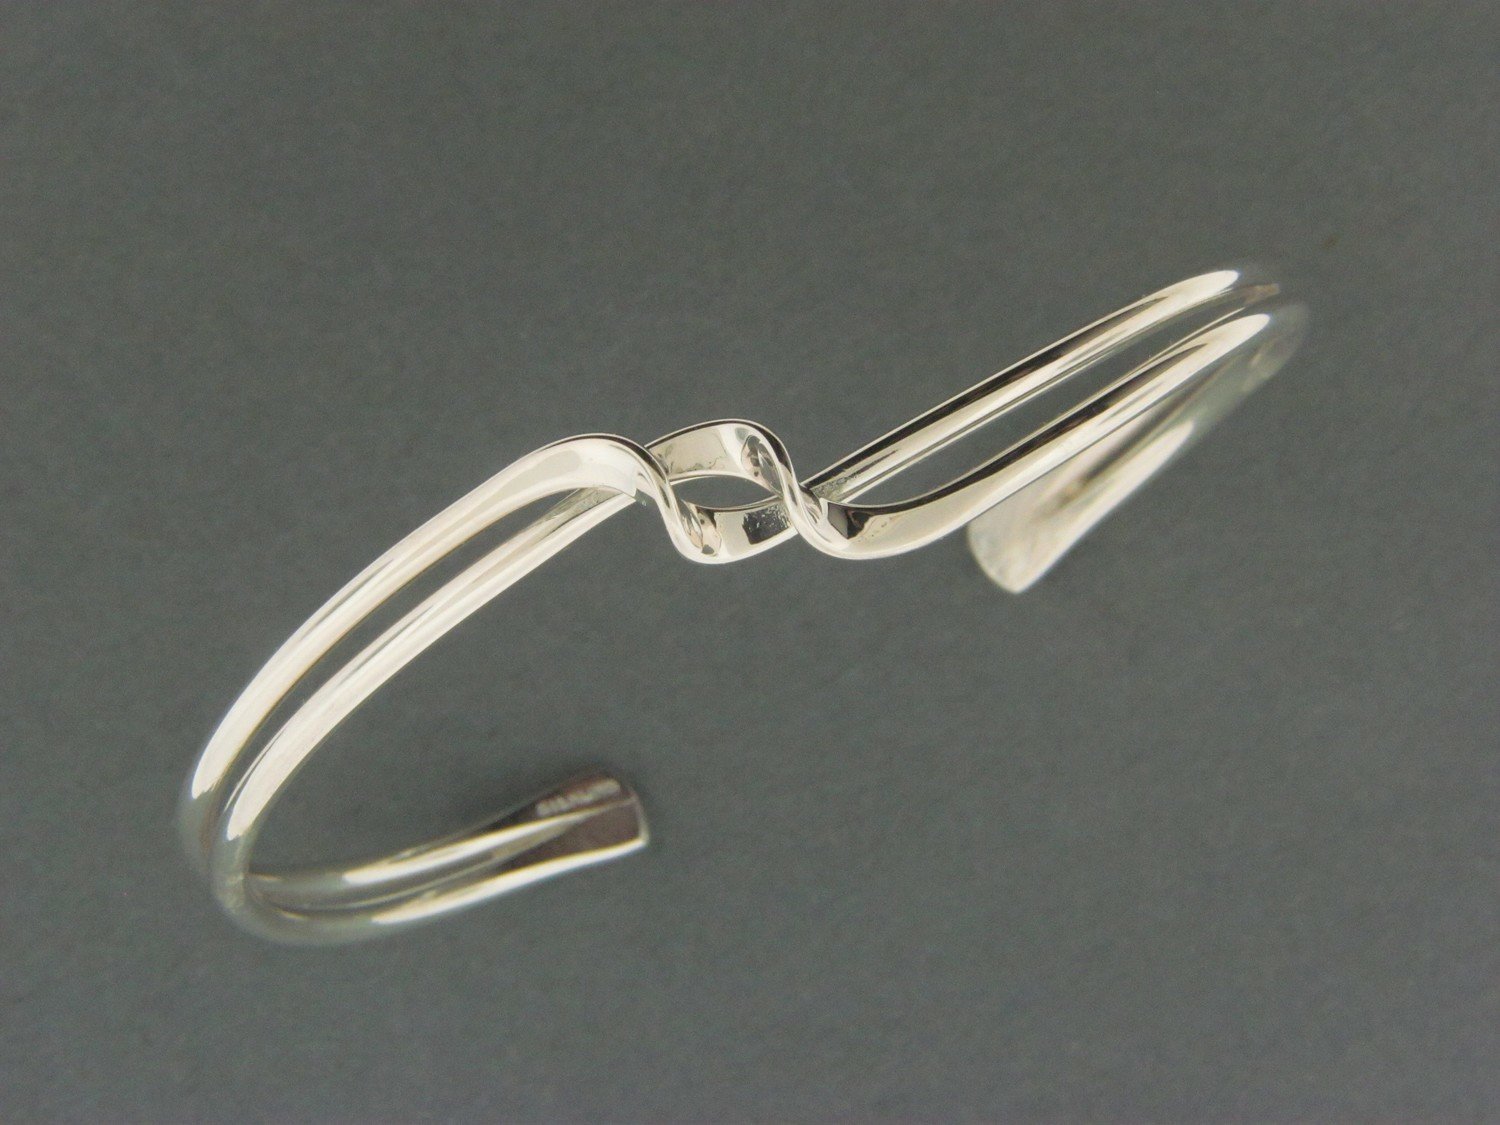 Entwined Wave Cuff